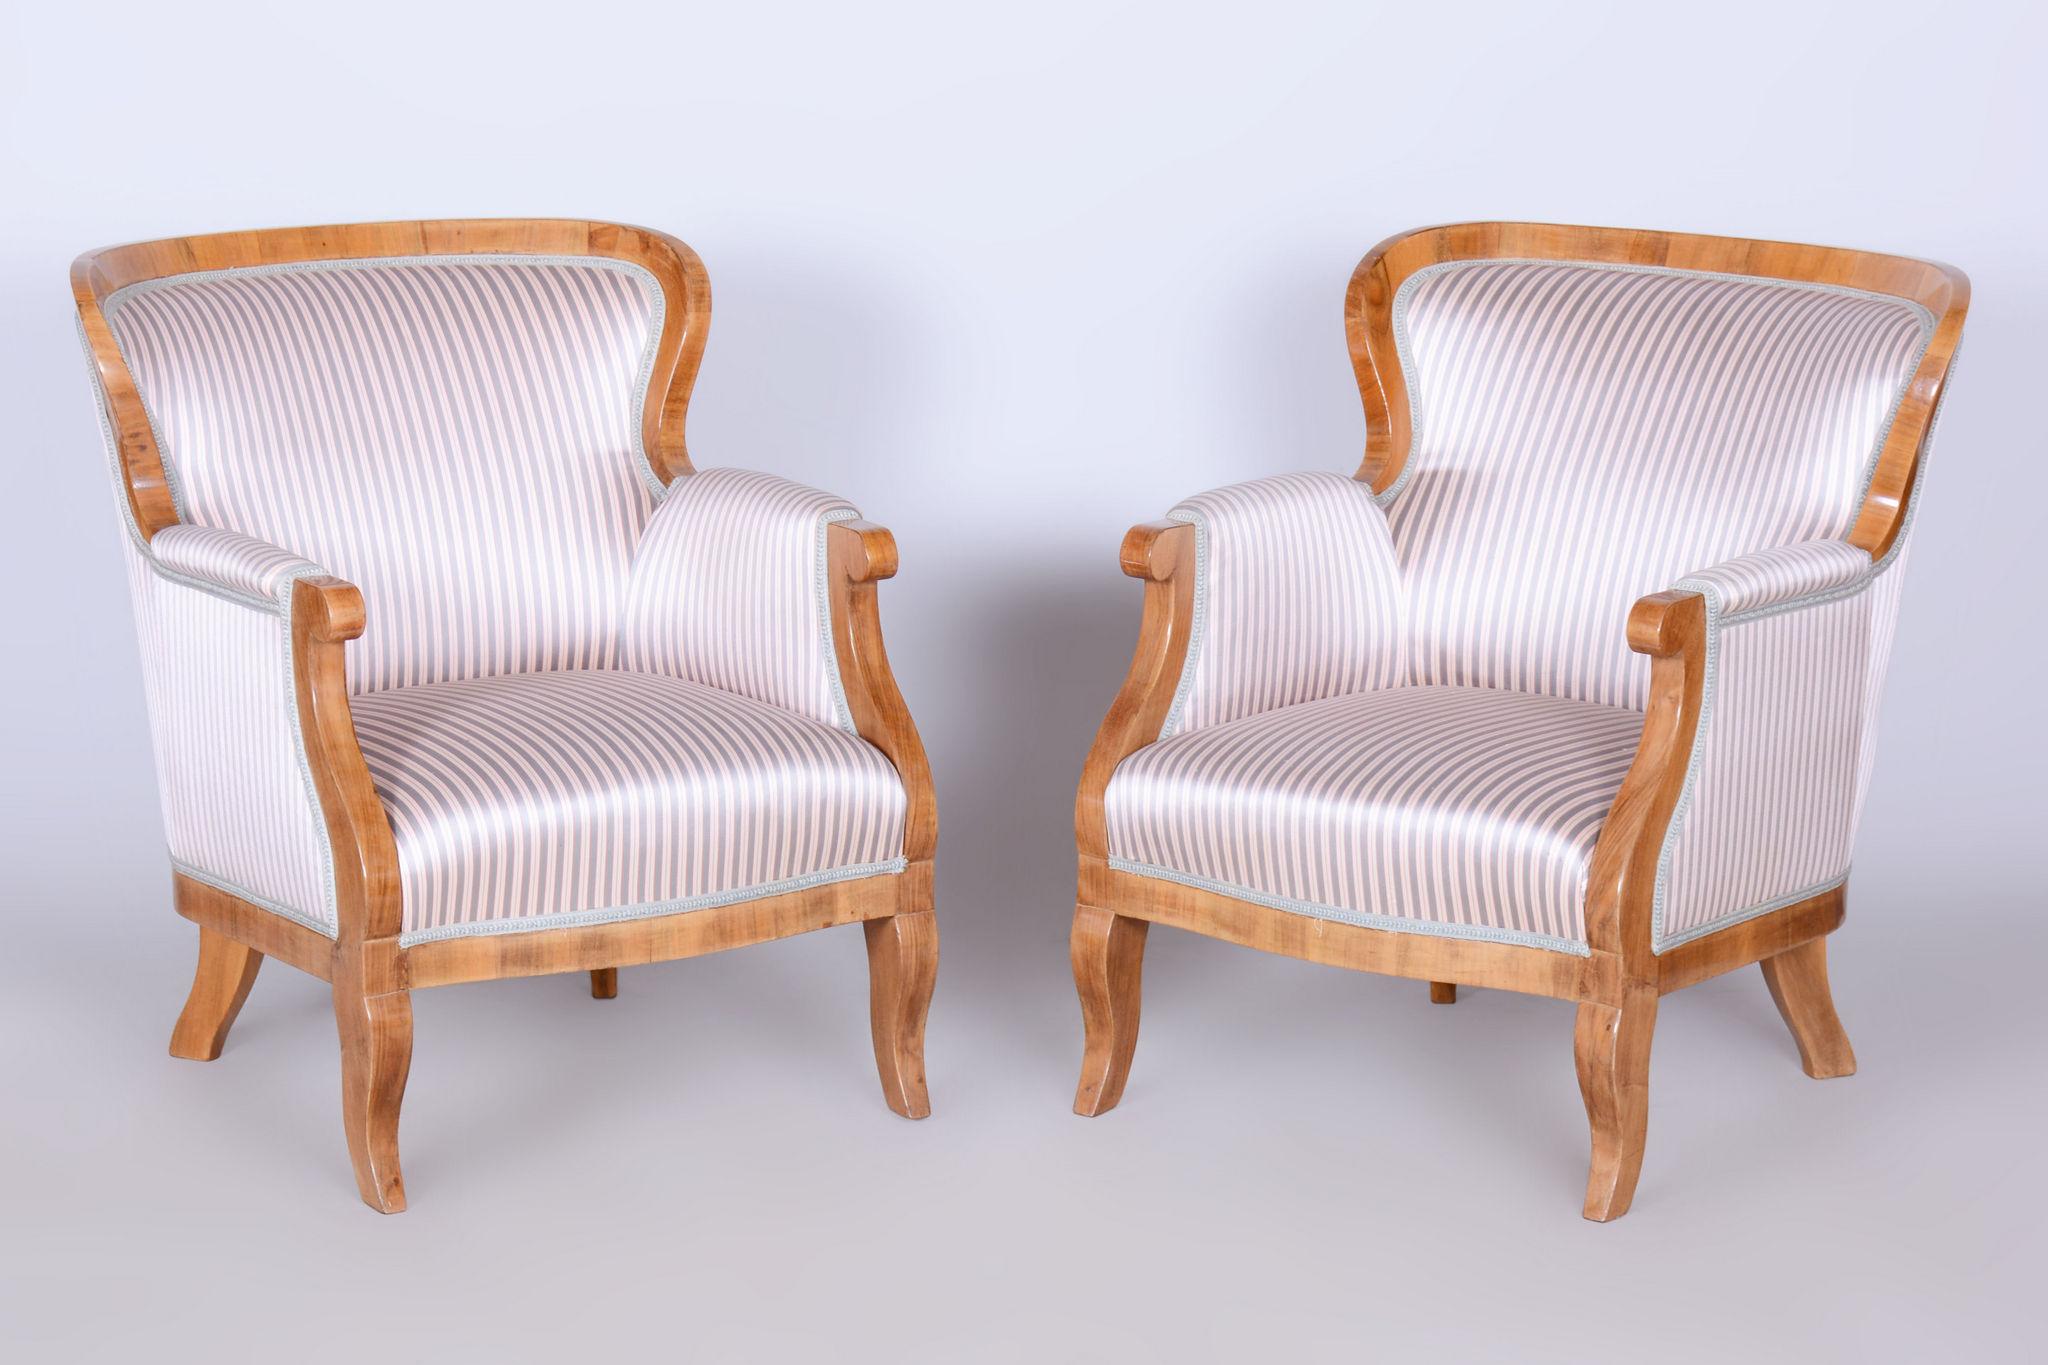 Restored Biedermeier Pair of Armchairs. 
Modernist Viennese model.

Source: Vienna, Austria
Period: 1830-1839
Material: Solid Oak, Spruce, Walnut

It has been re-polished with polyutherane piano lacquer by our professional refurbishing team in